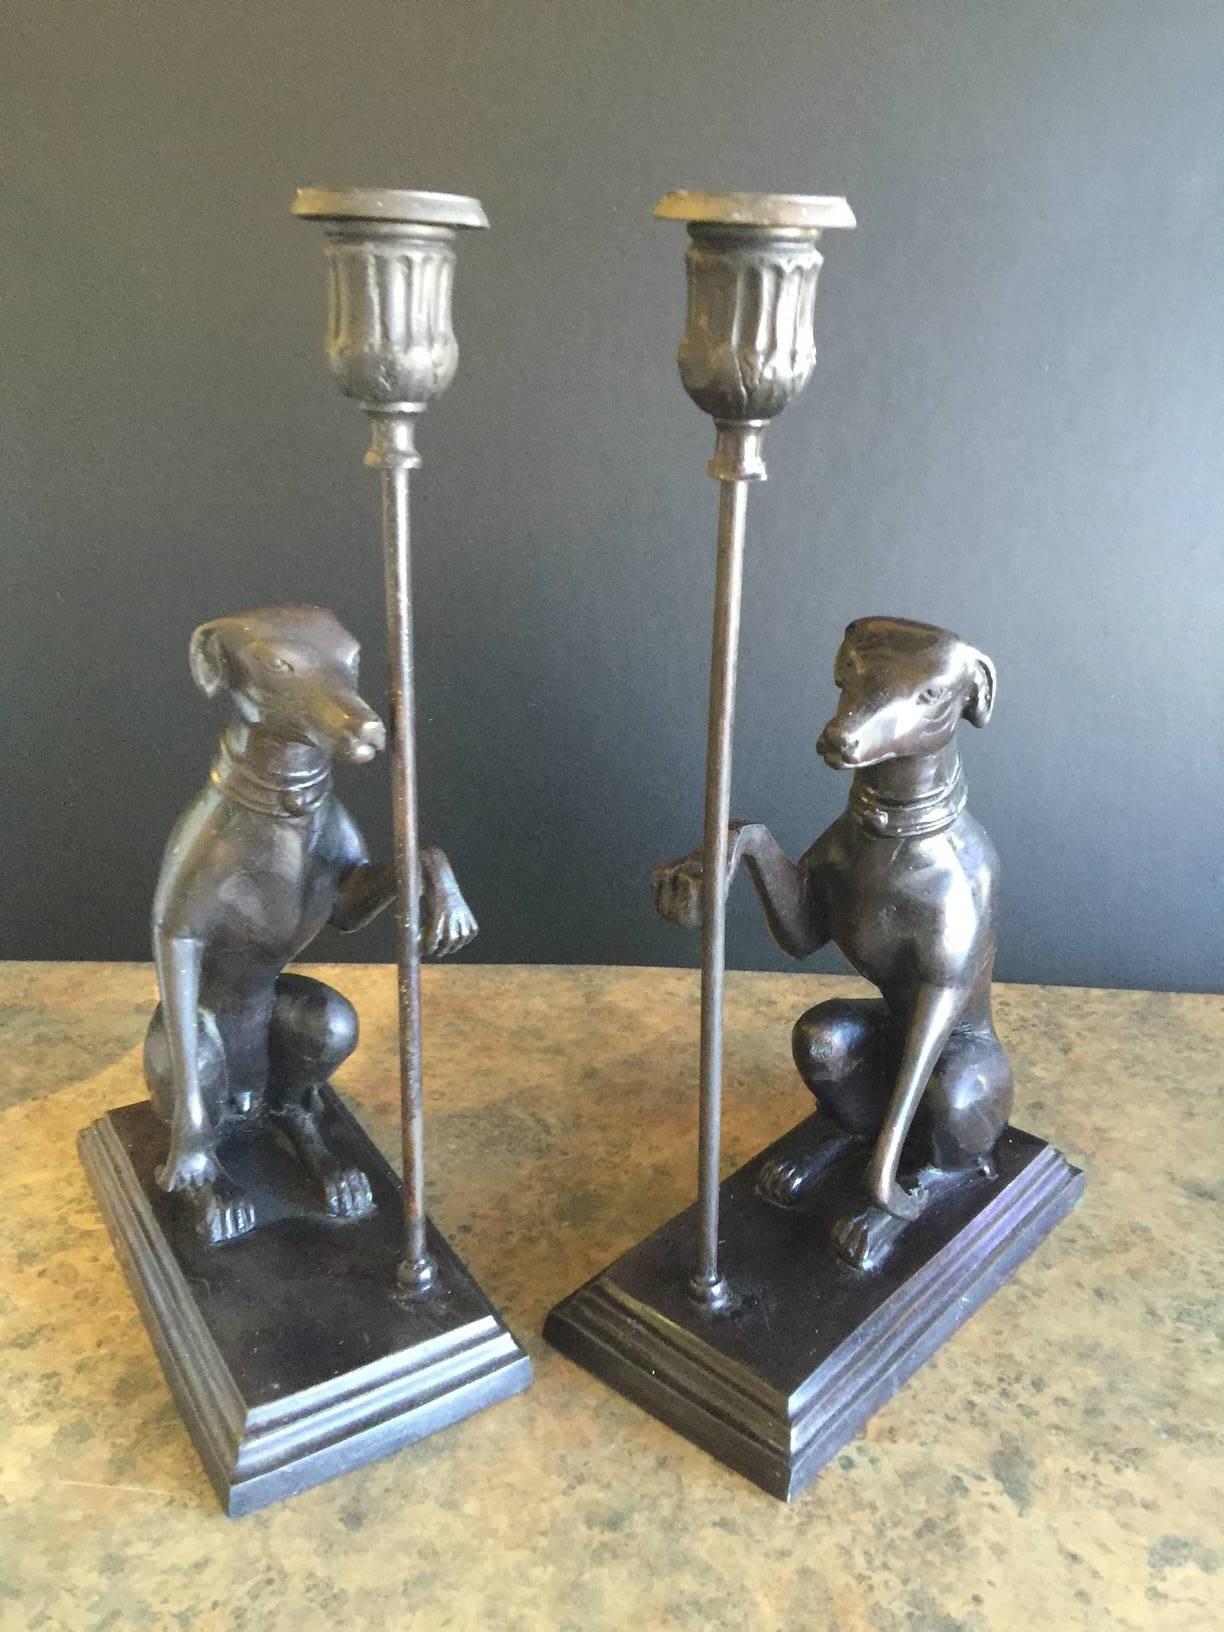 Substantial pair of bronze greyhound candle holder or bookends by Maitland-Smith.